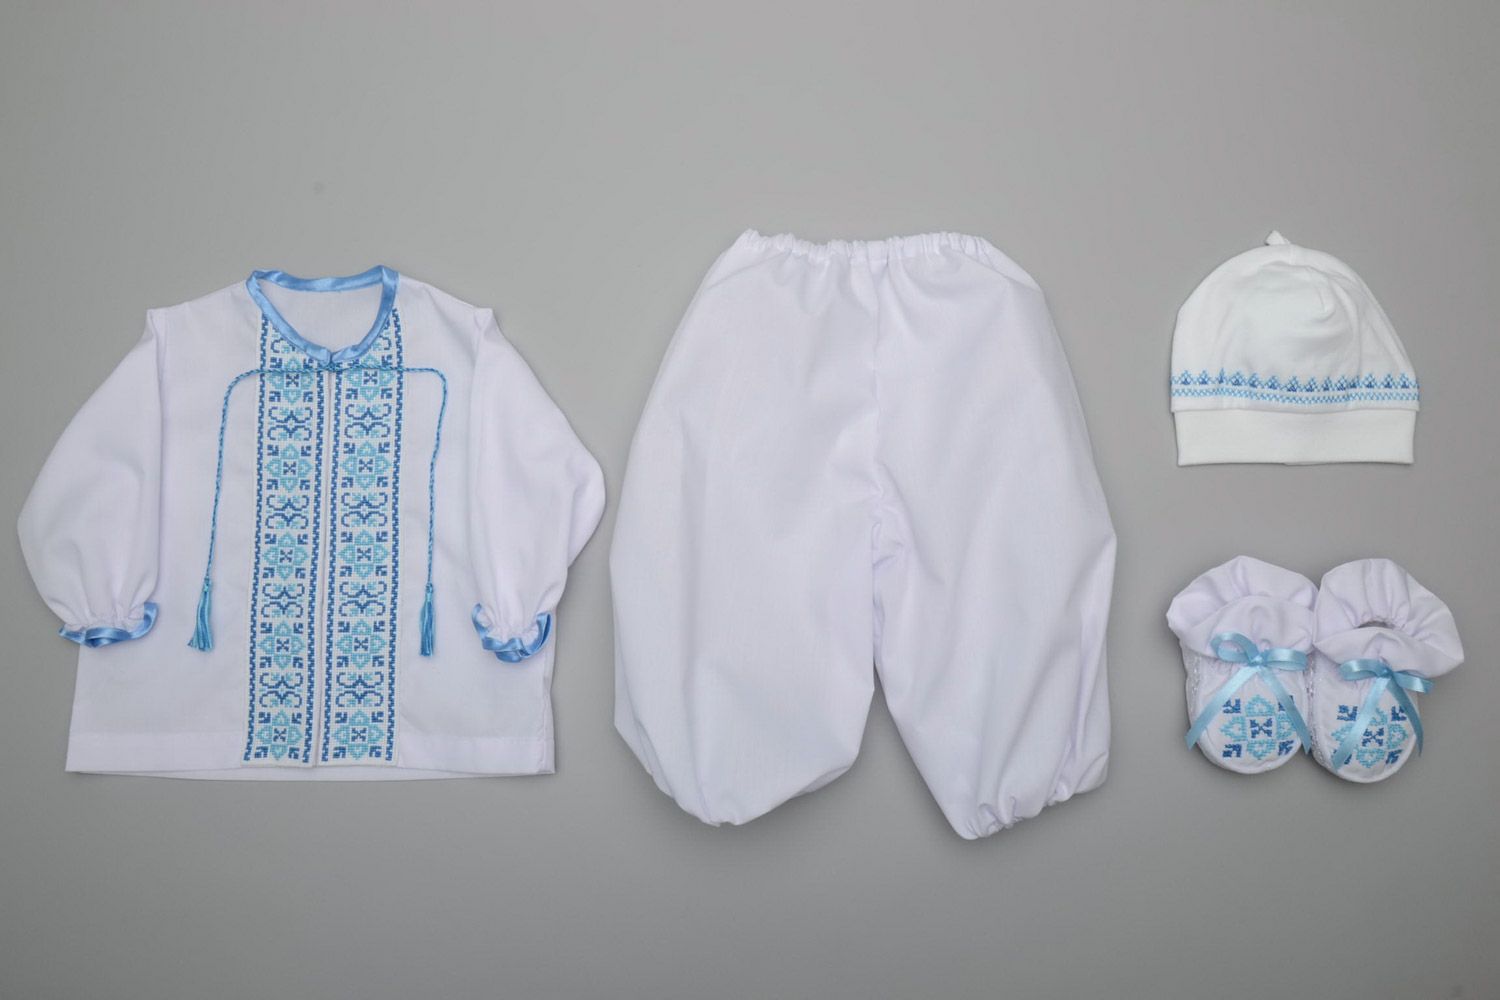 Handmade baby boy clothes set with blue embroidery shirt pants hat and shoes photo 5